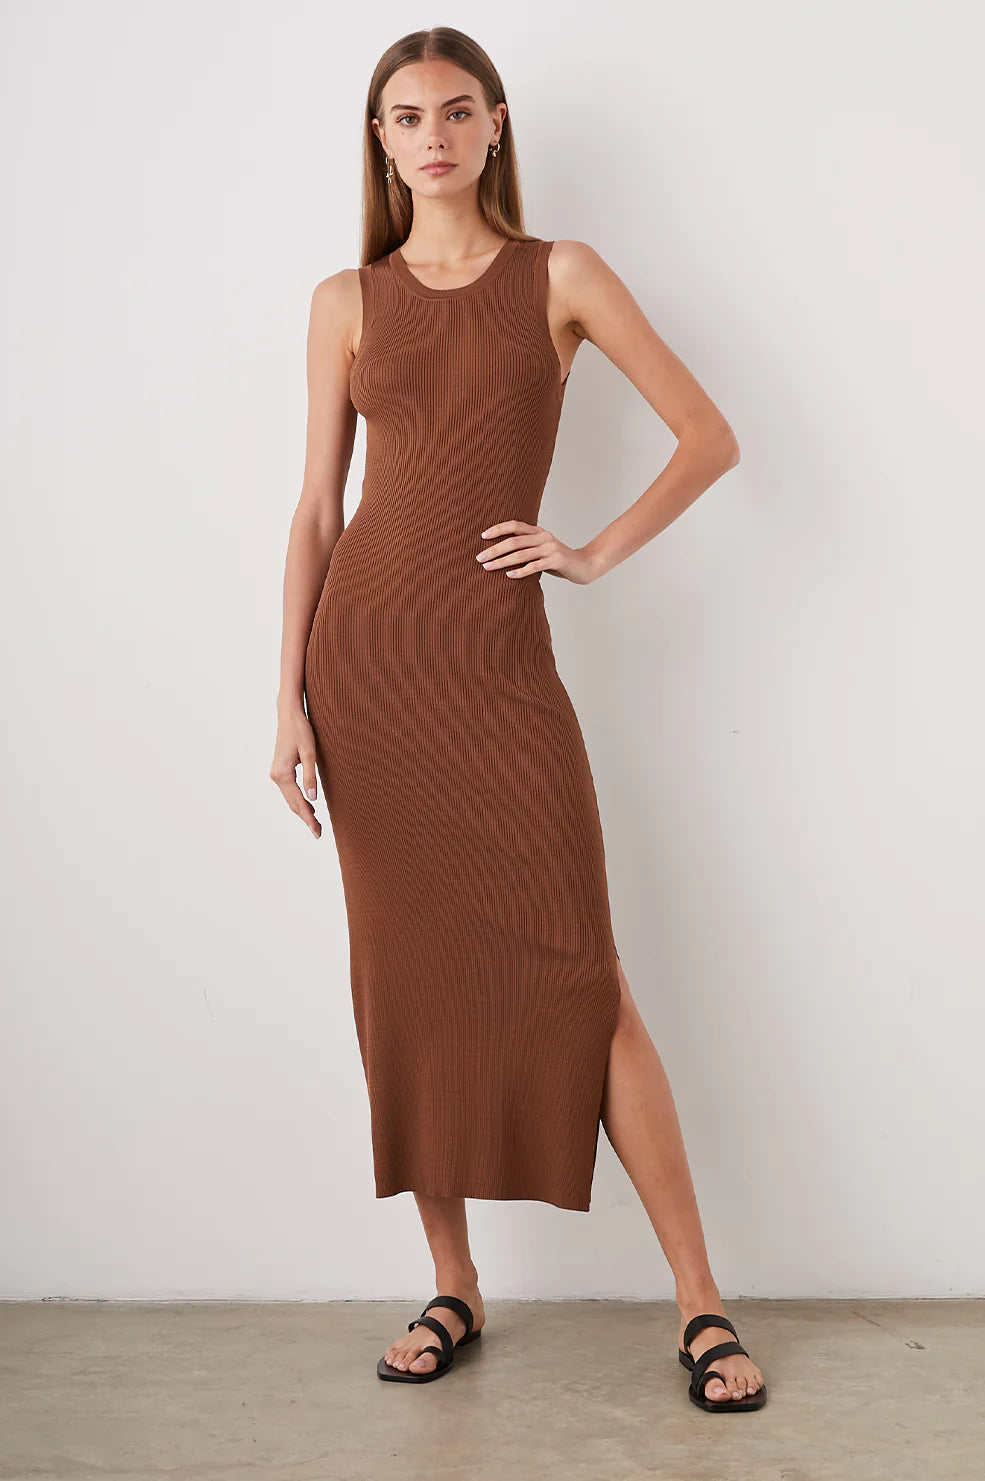 Syd Dress in Toffee